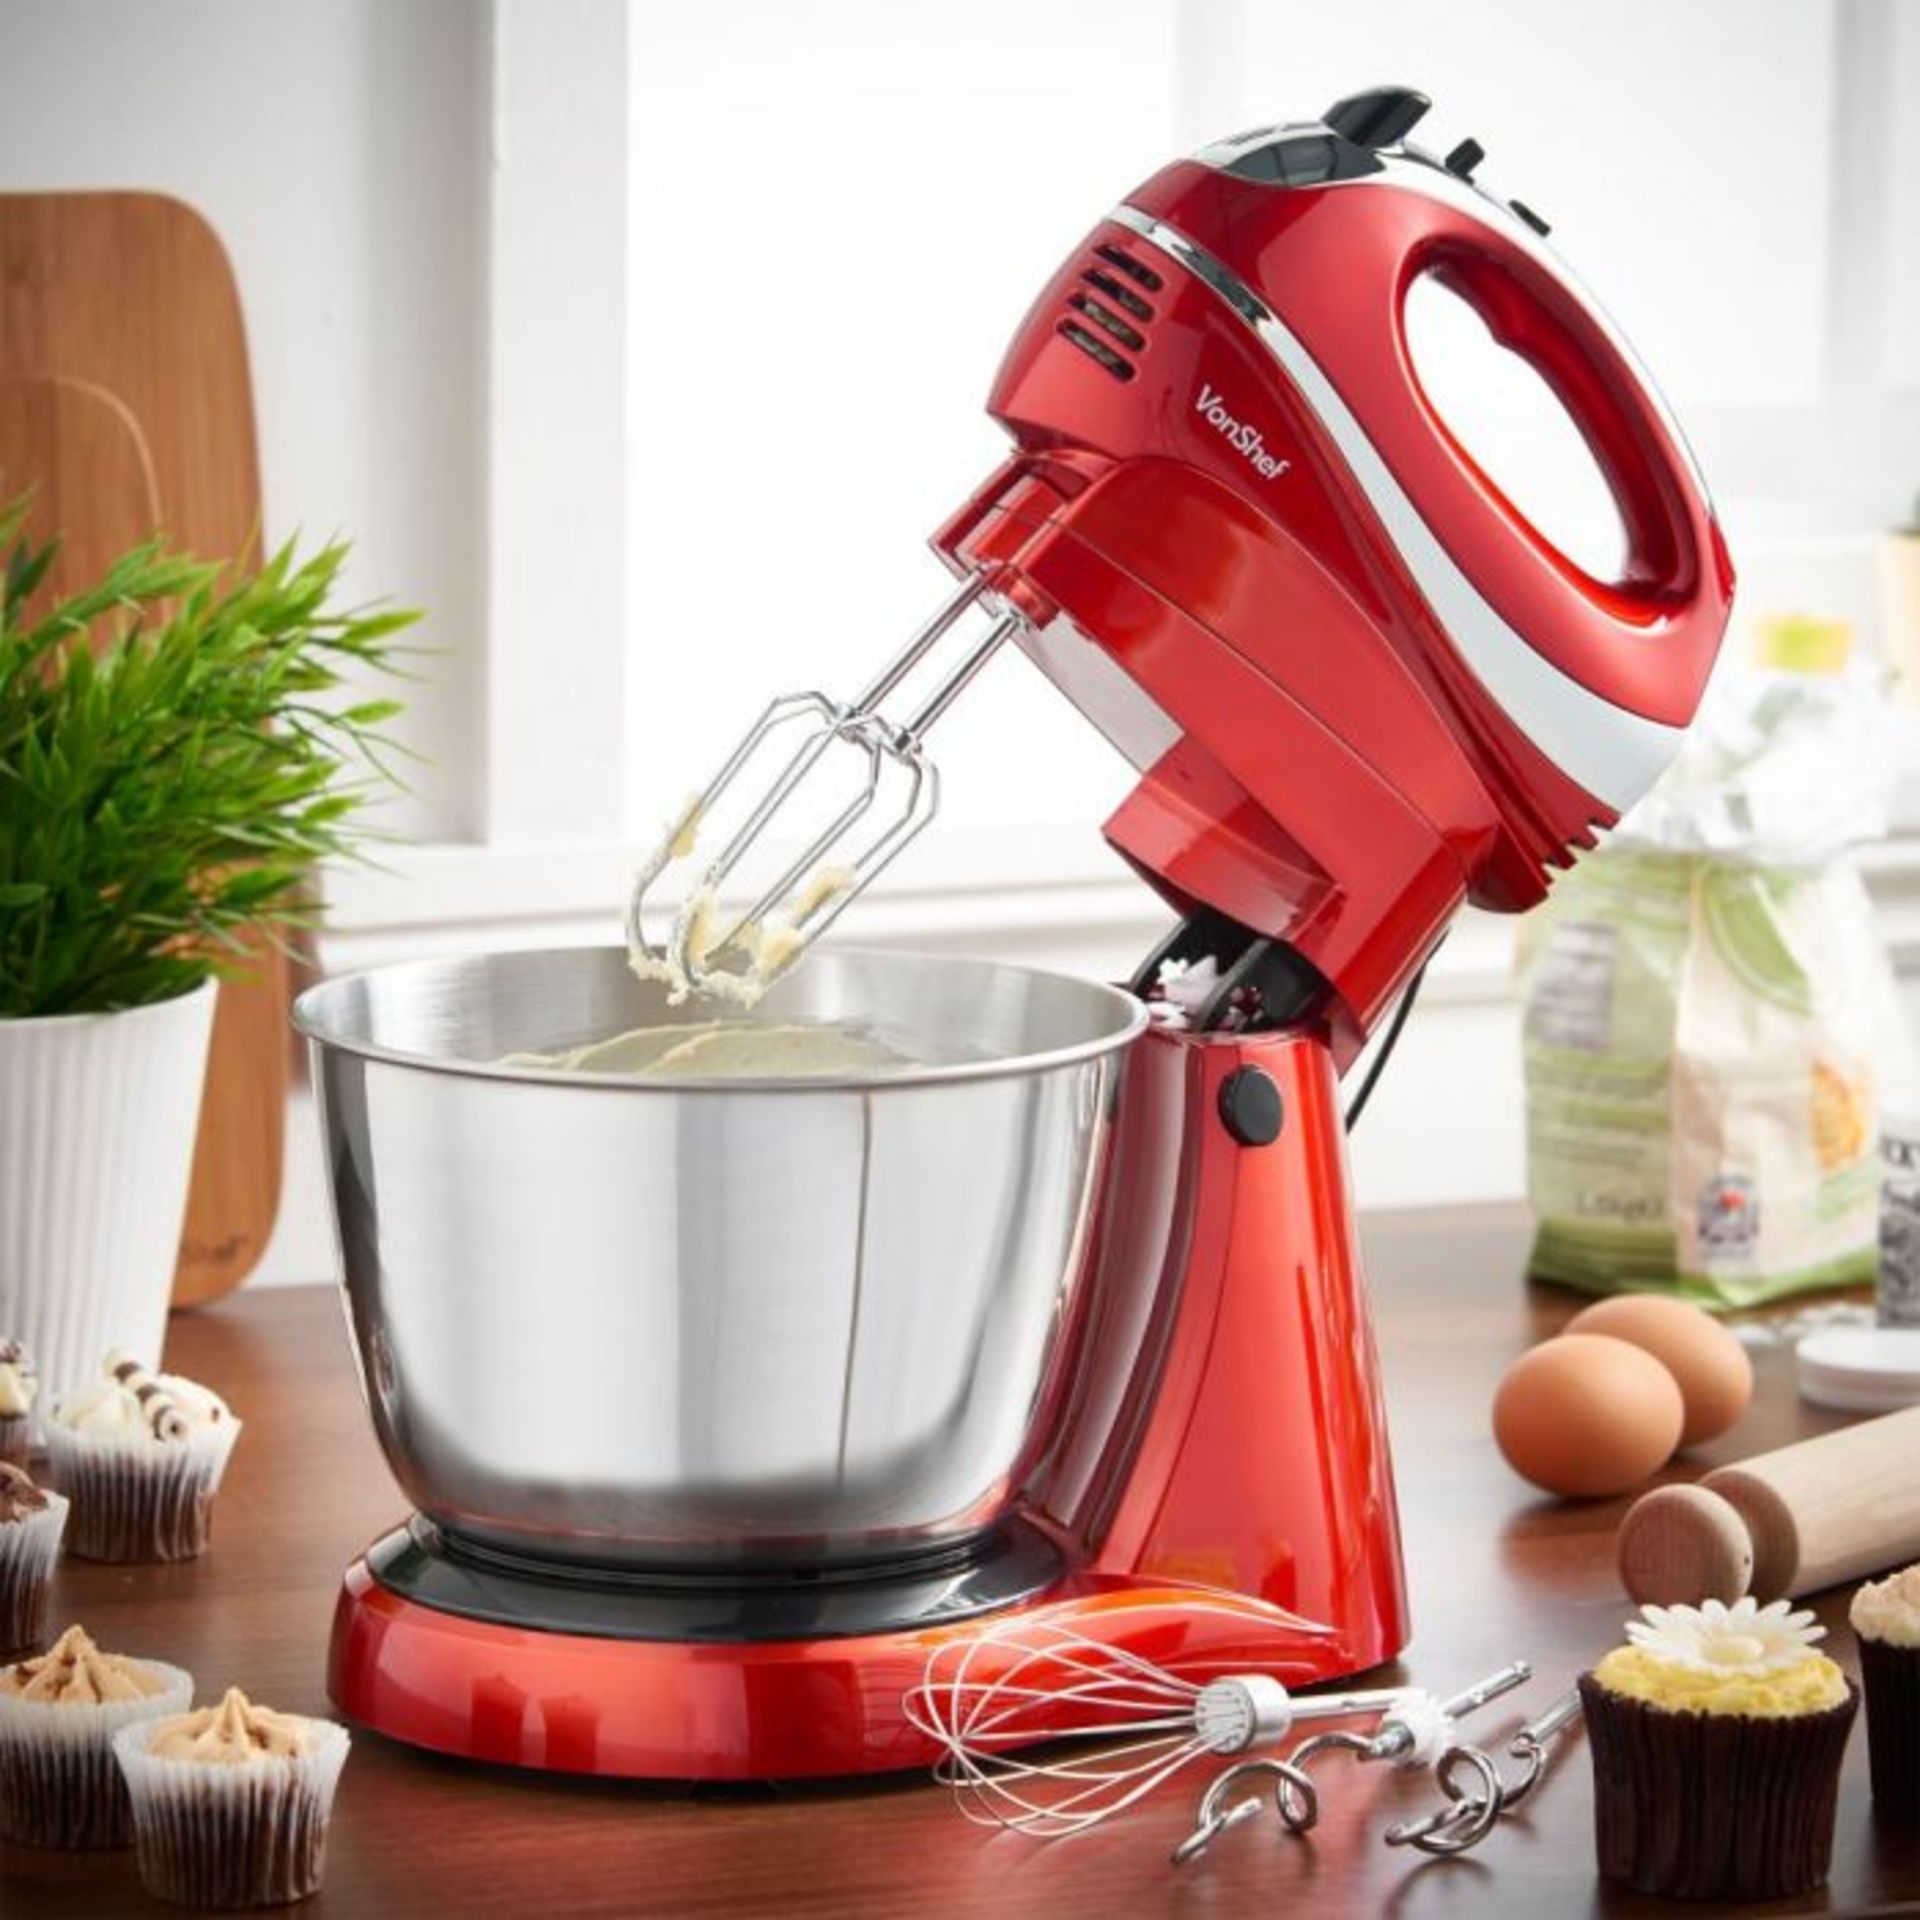 (V187) Red Hand & Stand Mixer The Red stand mixer and hand mixer is a must have kitchen applia...